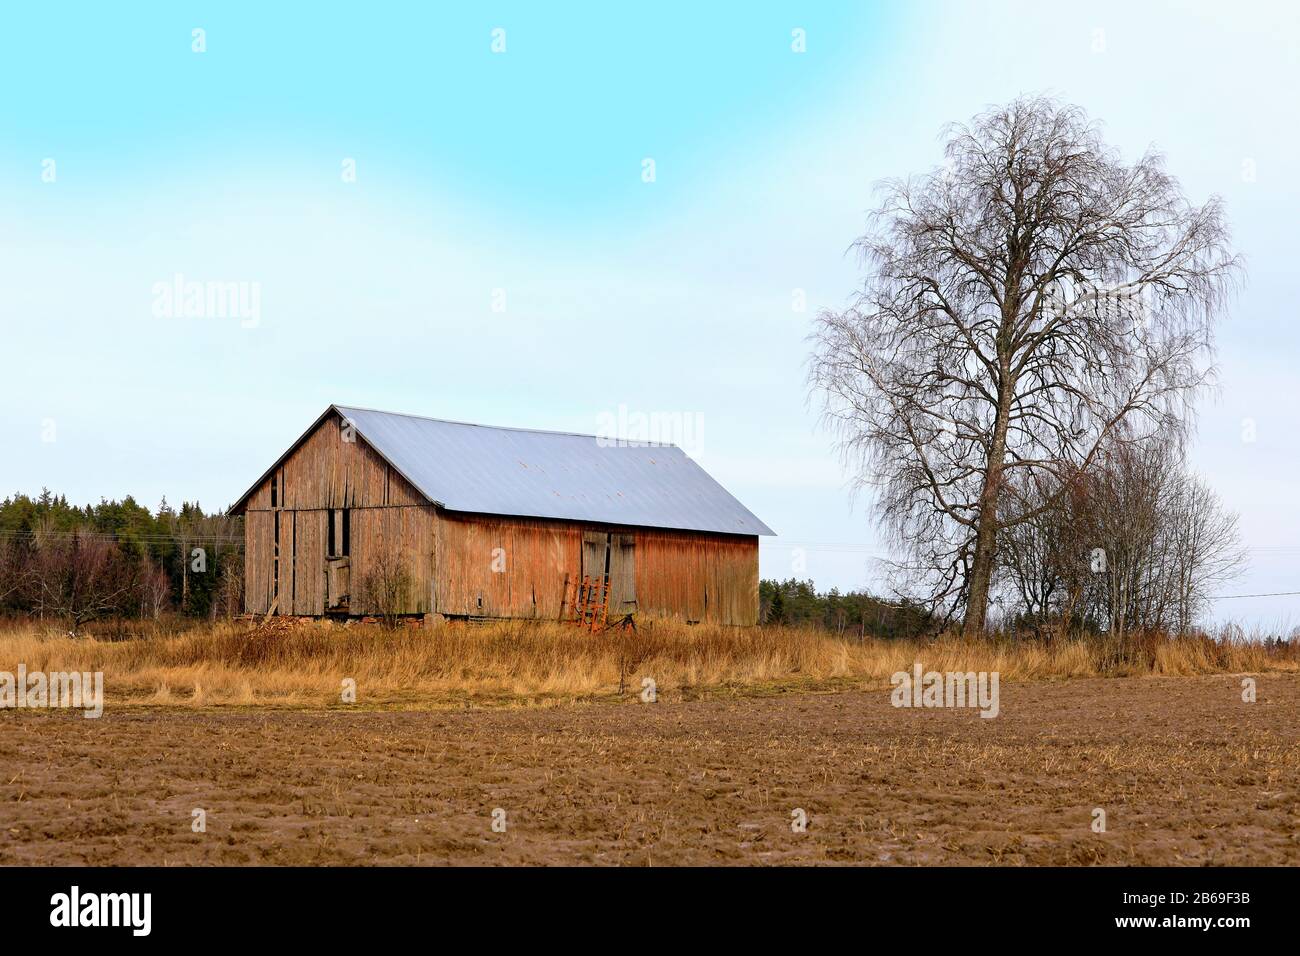 Old, nostalgic country barn seen better days with a tree and cultivated field on a semi sunny day of spring. Somero, Finland. March 7, 2020. Stock Photo